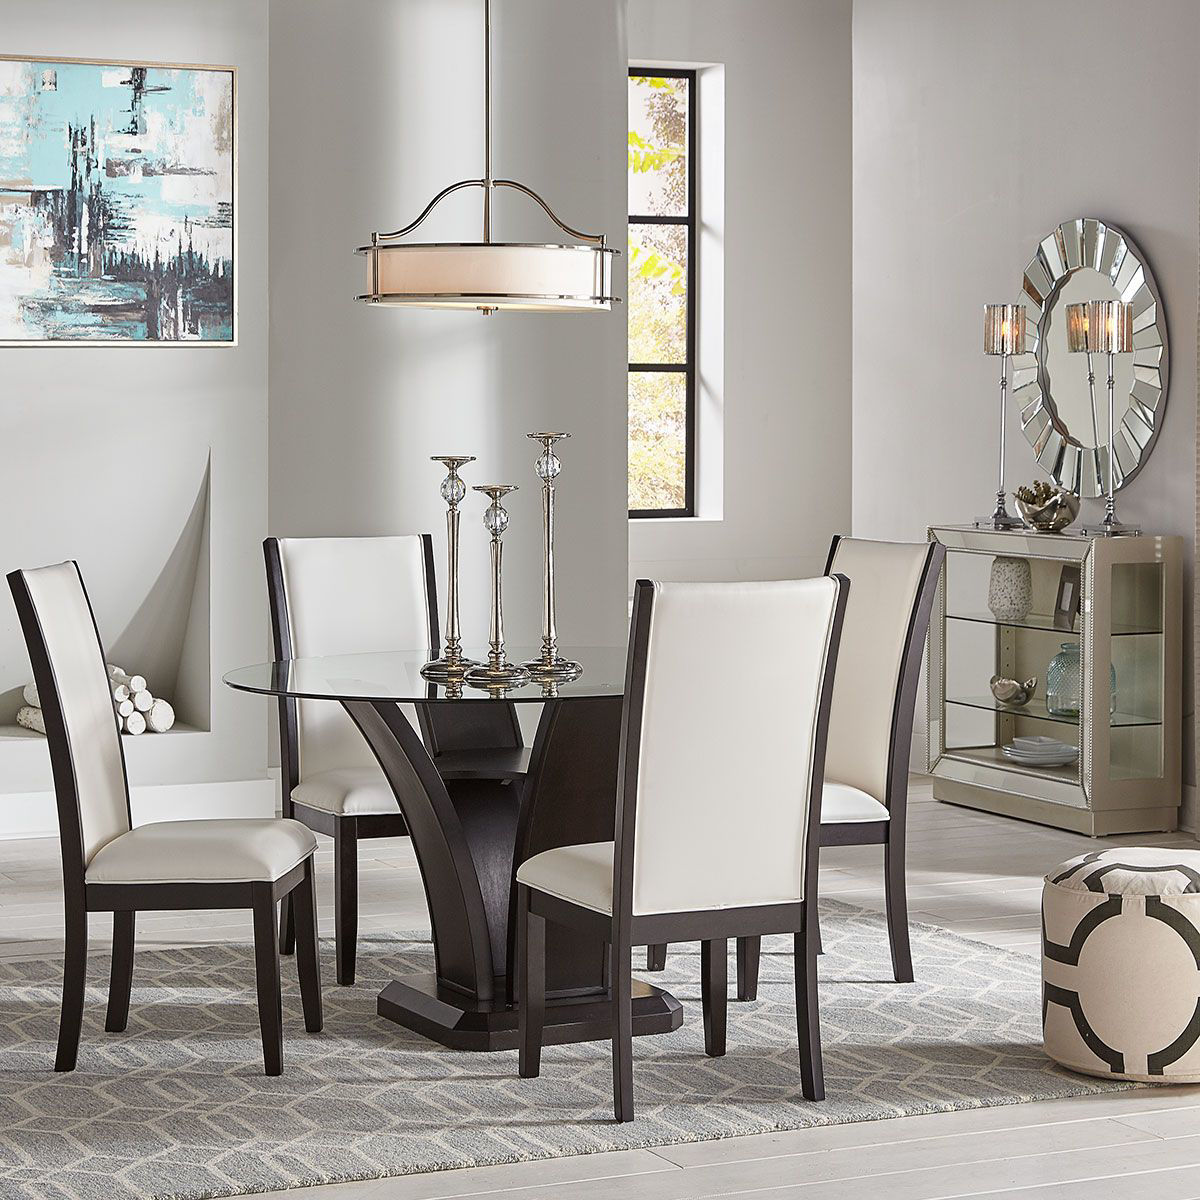 Round Dining Table 5 Chairs / Overstock Com Online Shopping Bedding